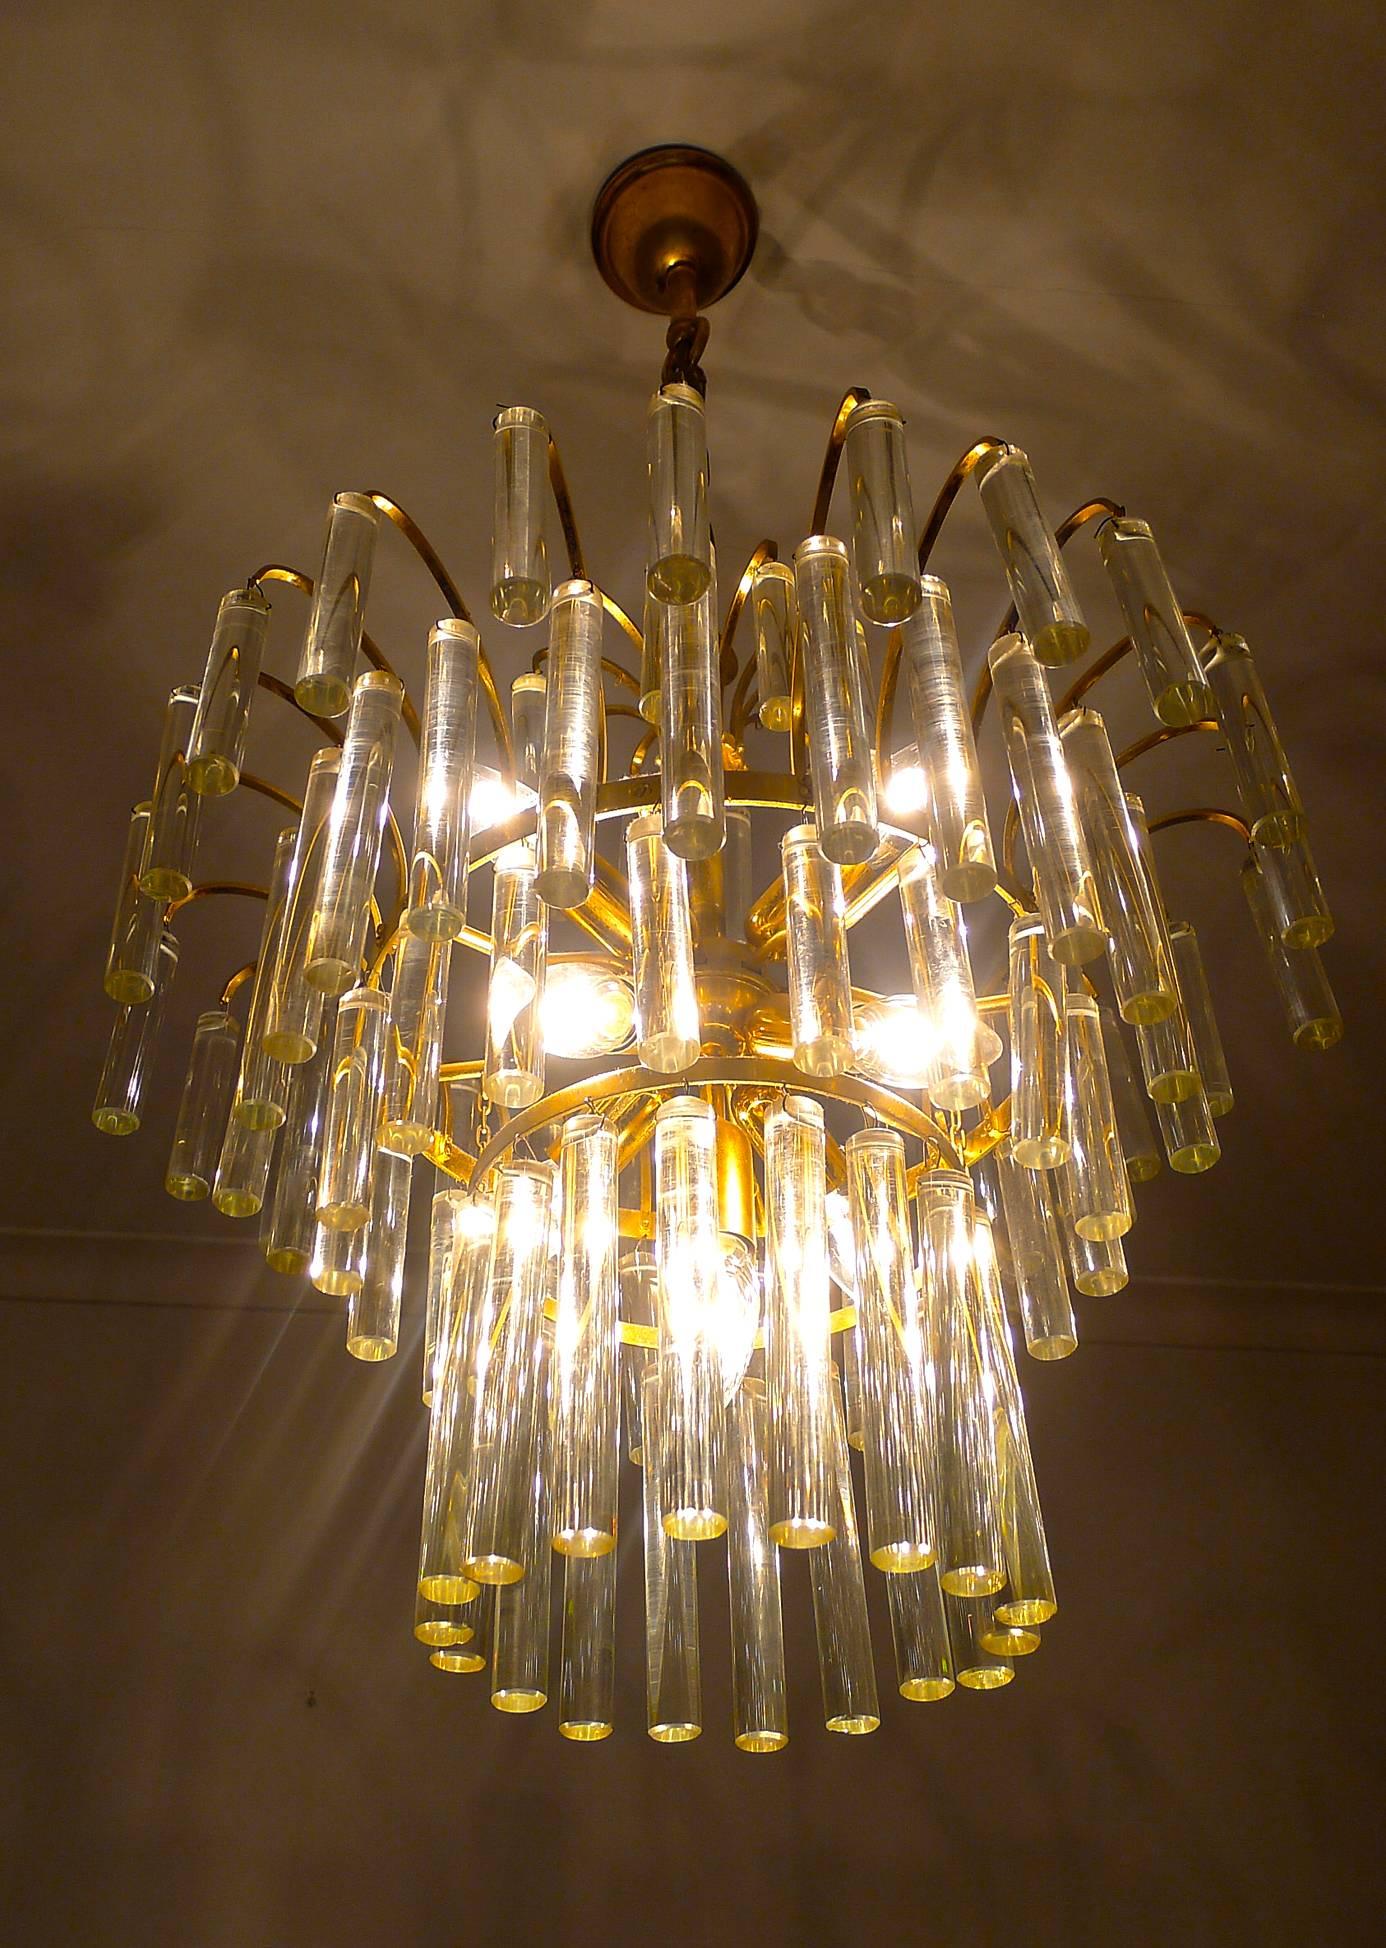 Large Venini Camer Midcentury Gilt Brass 94 Crystal Rods Waterfall Chandelier In Good Condition For Sale In Coimbra, PT